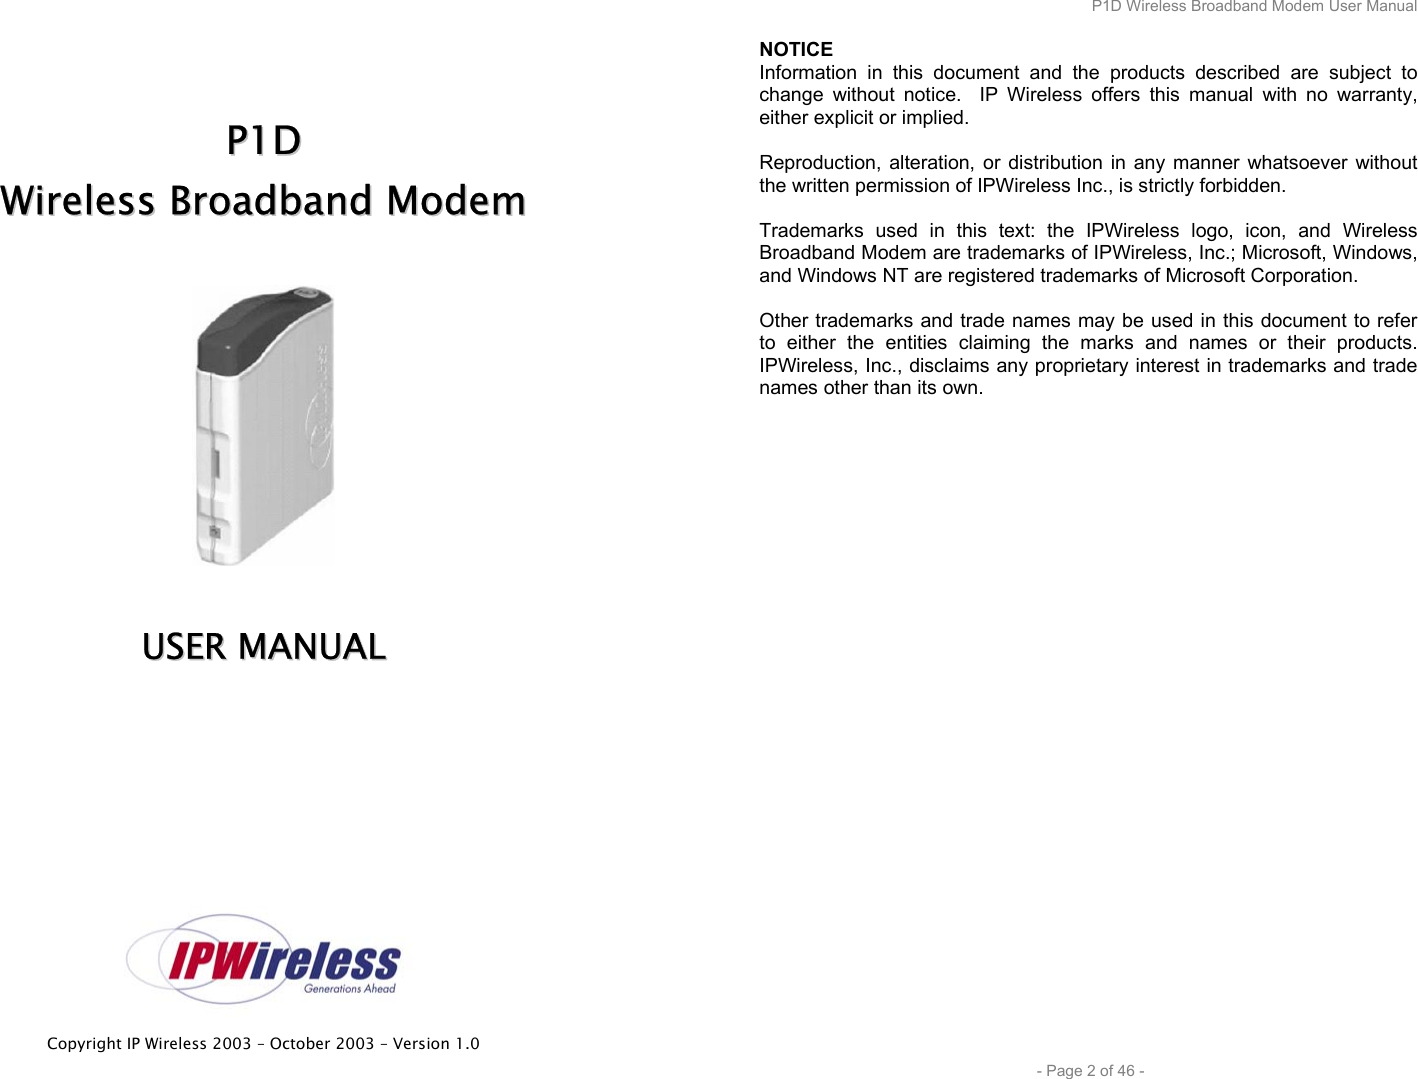  Copyright IP Wireless 2003 – October 2003 – Version 1.0     PP11DD  WWiirreelleessss  BBrrooaaddbbaanndd  MMooddeemm     UUSSEERR  MMAANNUUAALL      P1D Wireless Broadband Modem User Manual  - Page 2 of 46 - NOTICE Information in this document and the products described are subject to change without notice.  IP Wireless offers this manual with no warranty, either explicit or implied.  Reproduction, alteration, or distribution in any manner whatsoever without the written permission of IPWireless Inc., is strictly forbidden.  Trademarks used in this text: the IPWireless logo, icon, and Wireless Broadband Modem are trademarks of IPWireless, Inc.; Microsoft, Windows, and Windows NT are registered trademarks of Microsoft Corporation.  Other trademarks and trade names may be used in this document to refer to either the entities claiming the marks and names or their products. IPWireless, Inc., disclaims any proprietary interest in trademarks and trade names other than its own. 